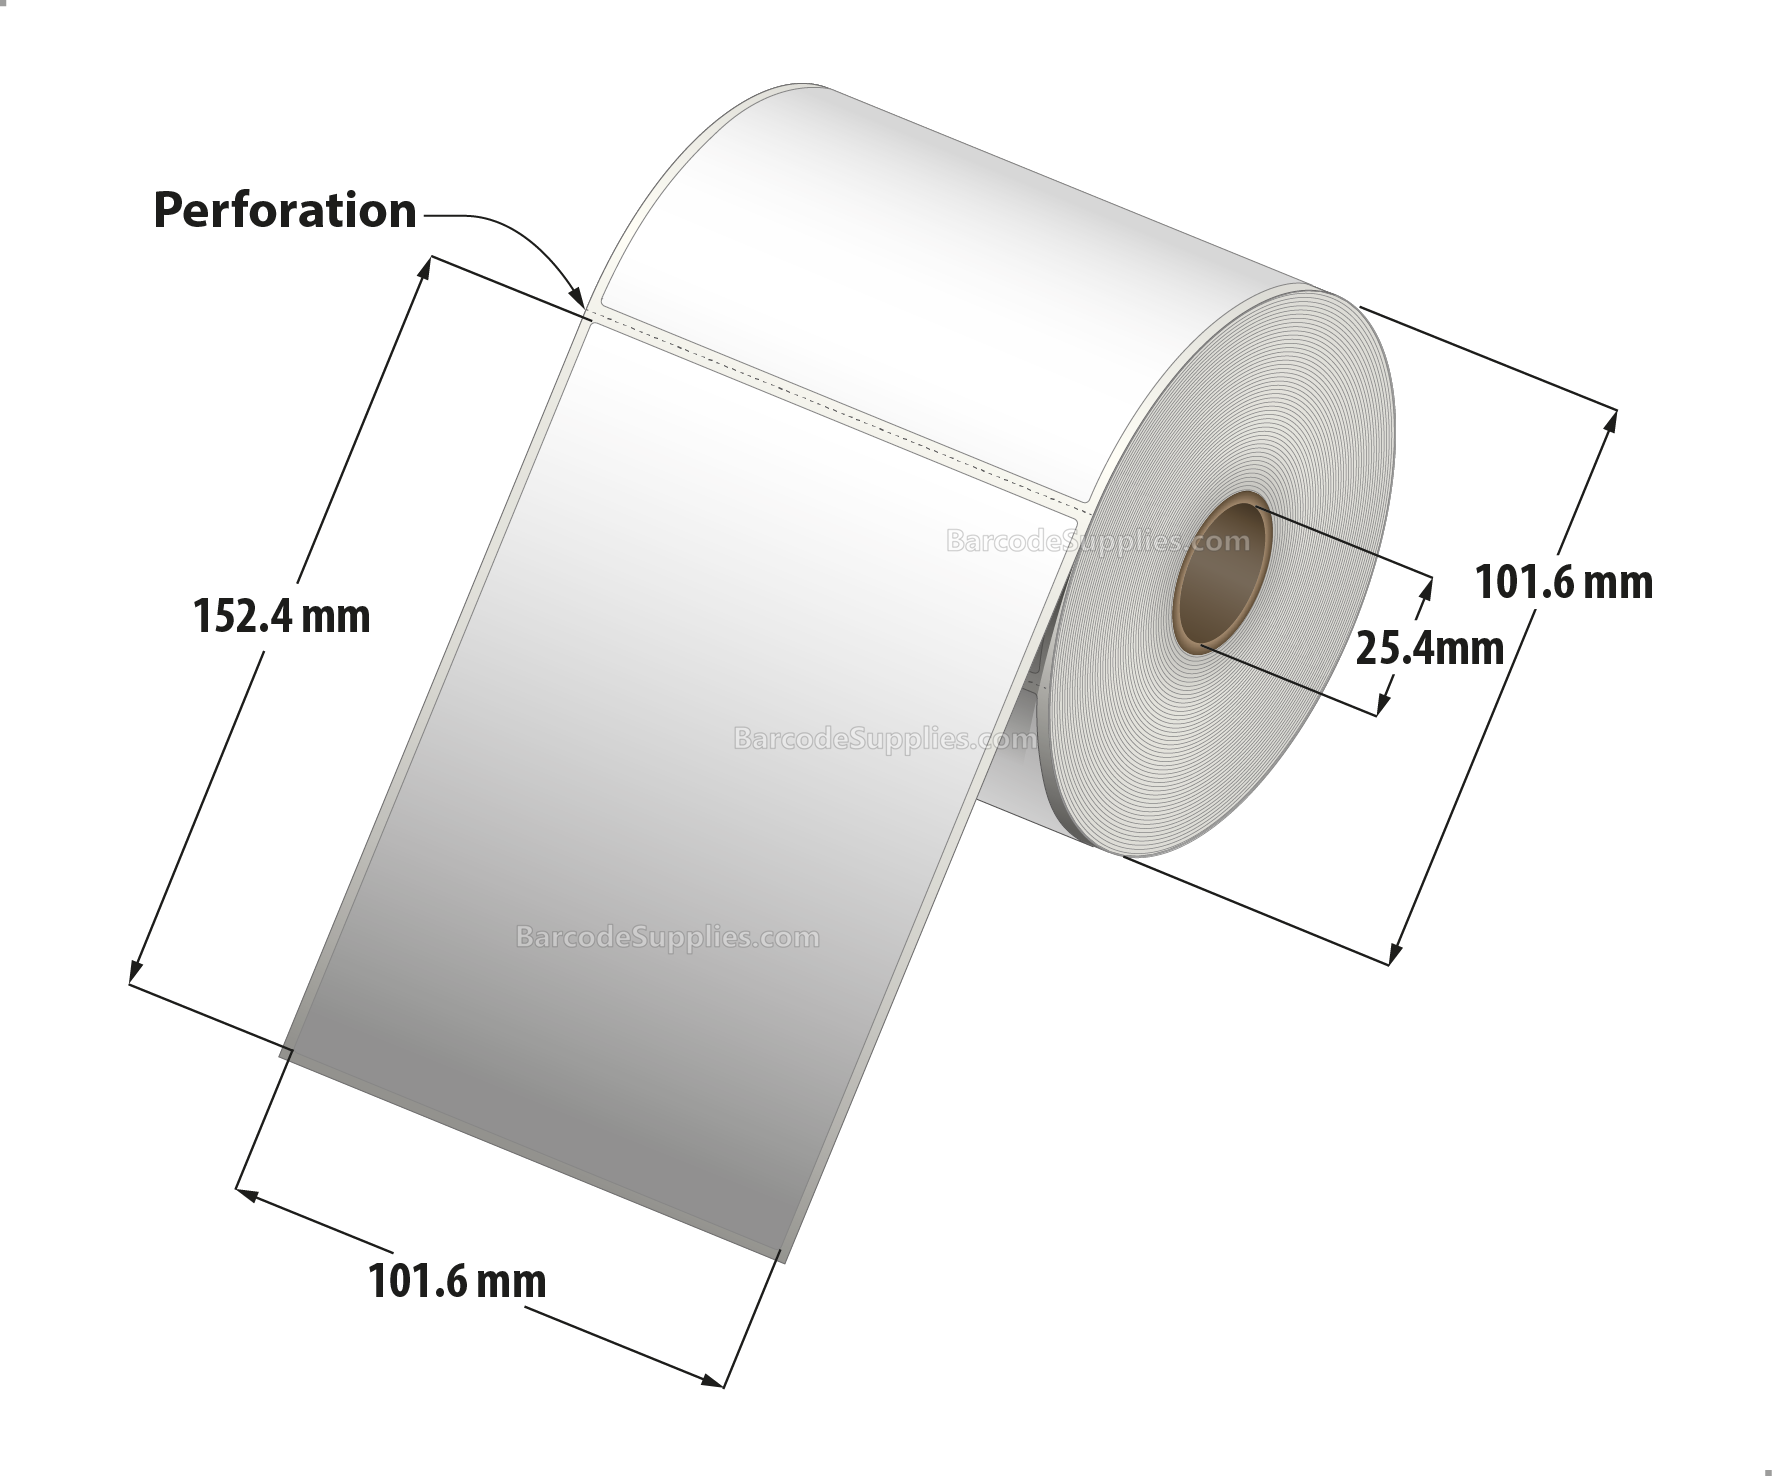 4 x 6 Thermal Transfer White Labels With Permanent Acrylic Adhesive - Perforated - 250 Labels Per Roll - Carton Of 4 Rolls - 1000 Labels Total - MPN: TH46-14PTT